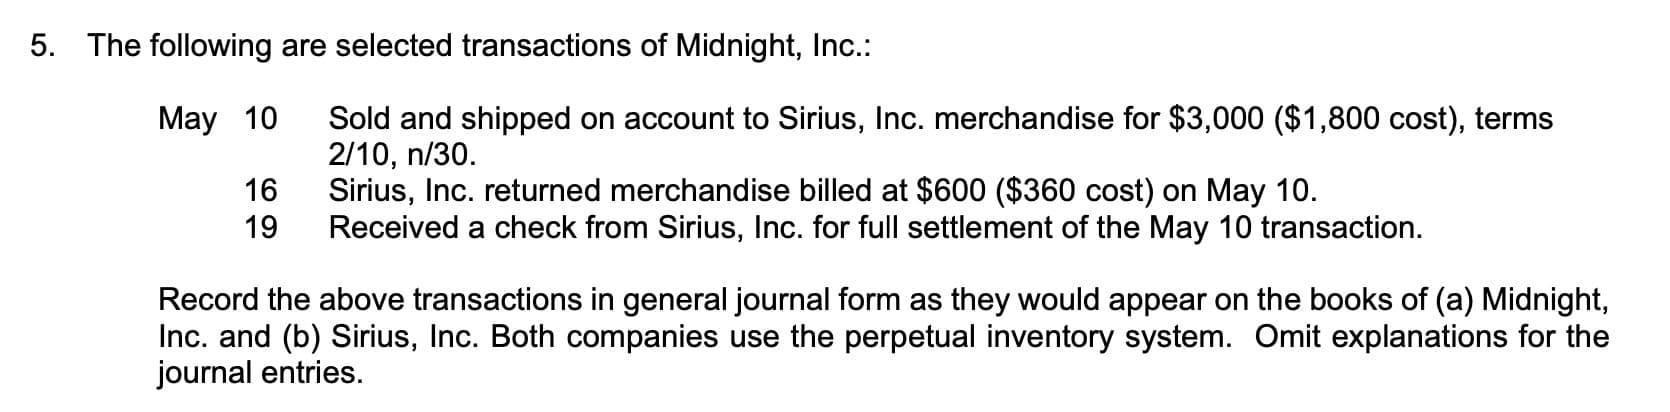 The following are selected transactions of Midnight, Inc.:
Sold and shipped on account to Sirius, Inc. merchandise for $3,000 ($1,800 cost), terms
2/10, n/30.
Sirius, Inc. returned merchandise billed at $600 ($360 cost) on May 10.
Received a check from Sirius, Inc. for full settlement of the May 10 transaction.
May 10
16
19
Record the above transactions in general journal form as they would appear on the books of (a) Midnight,
Inc. and (b) Sirius, Inc. Both companies use the perpetual inventory system. Omit explanations for the
journal entries.
